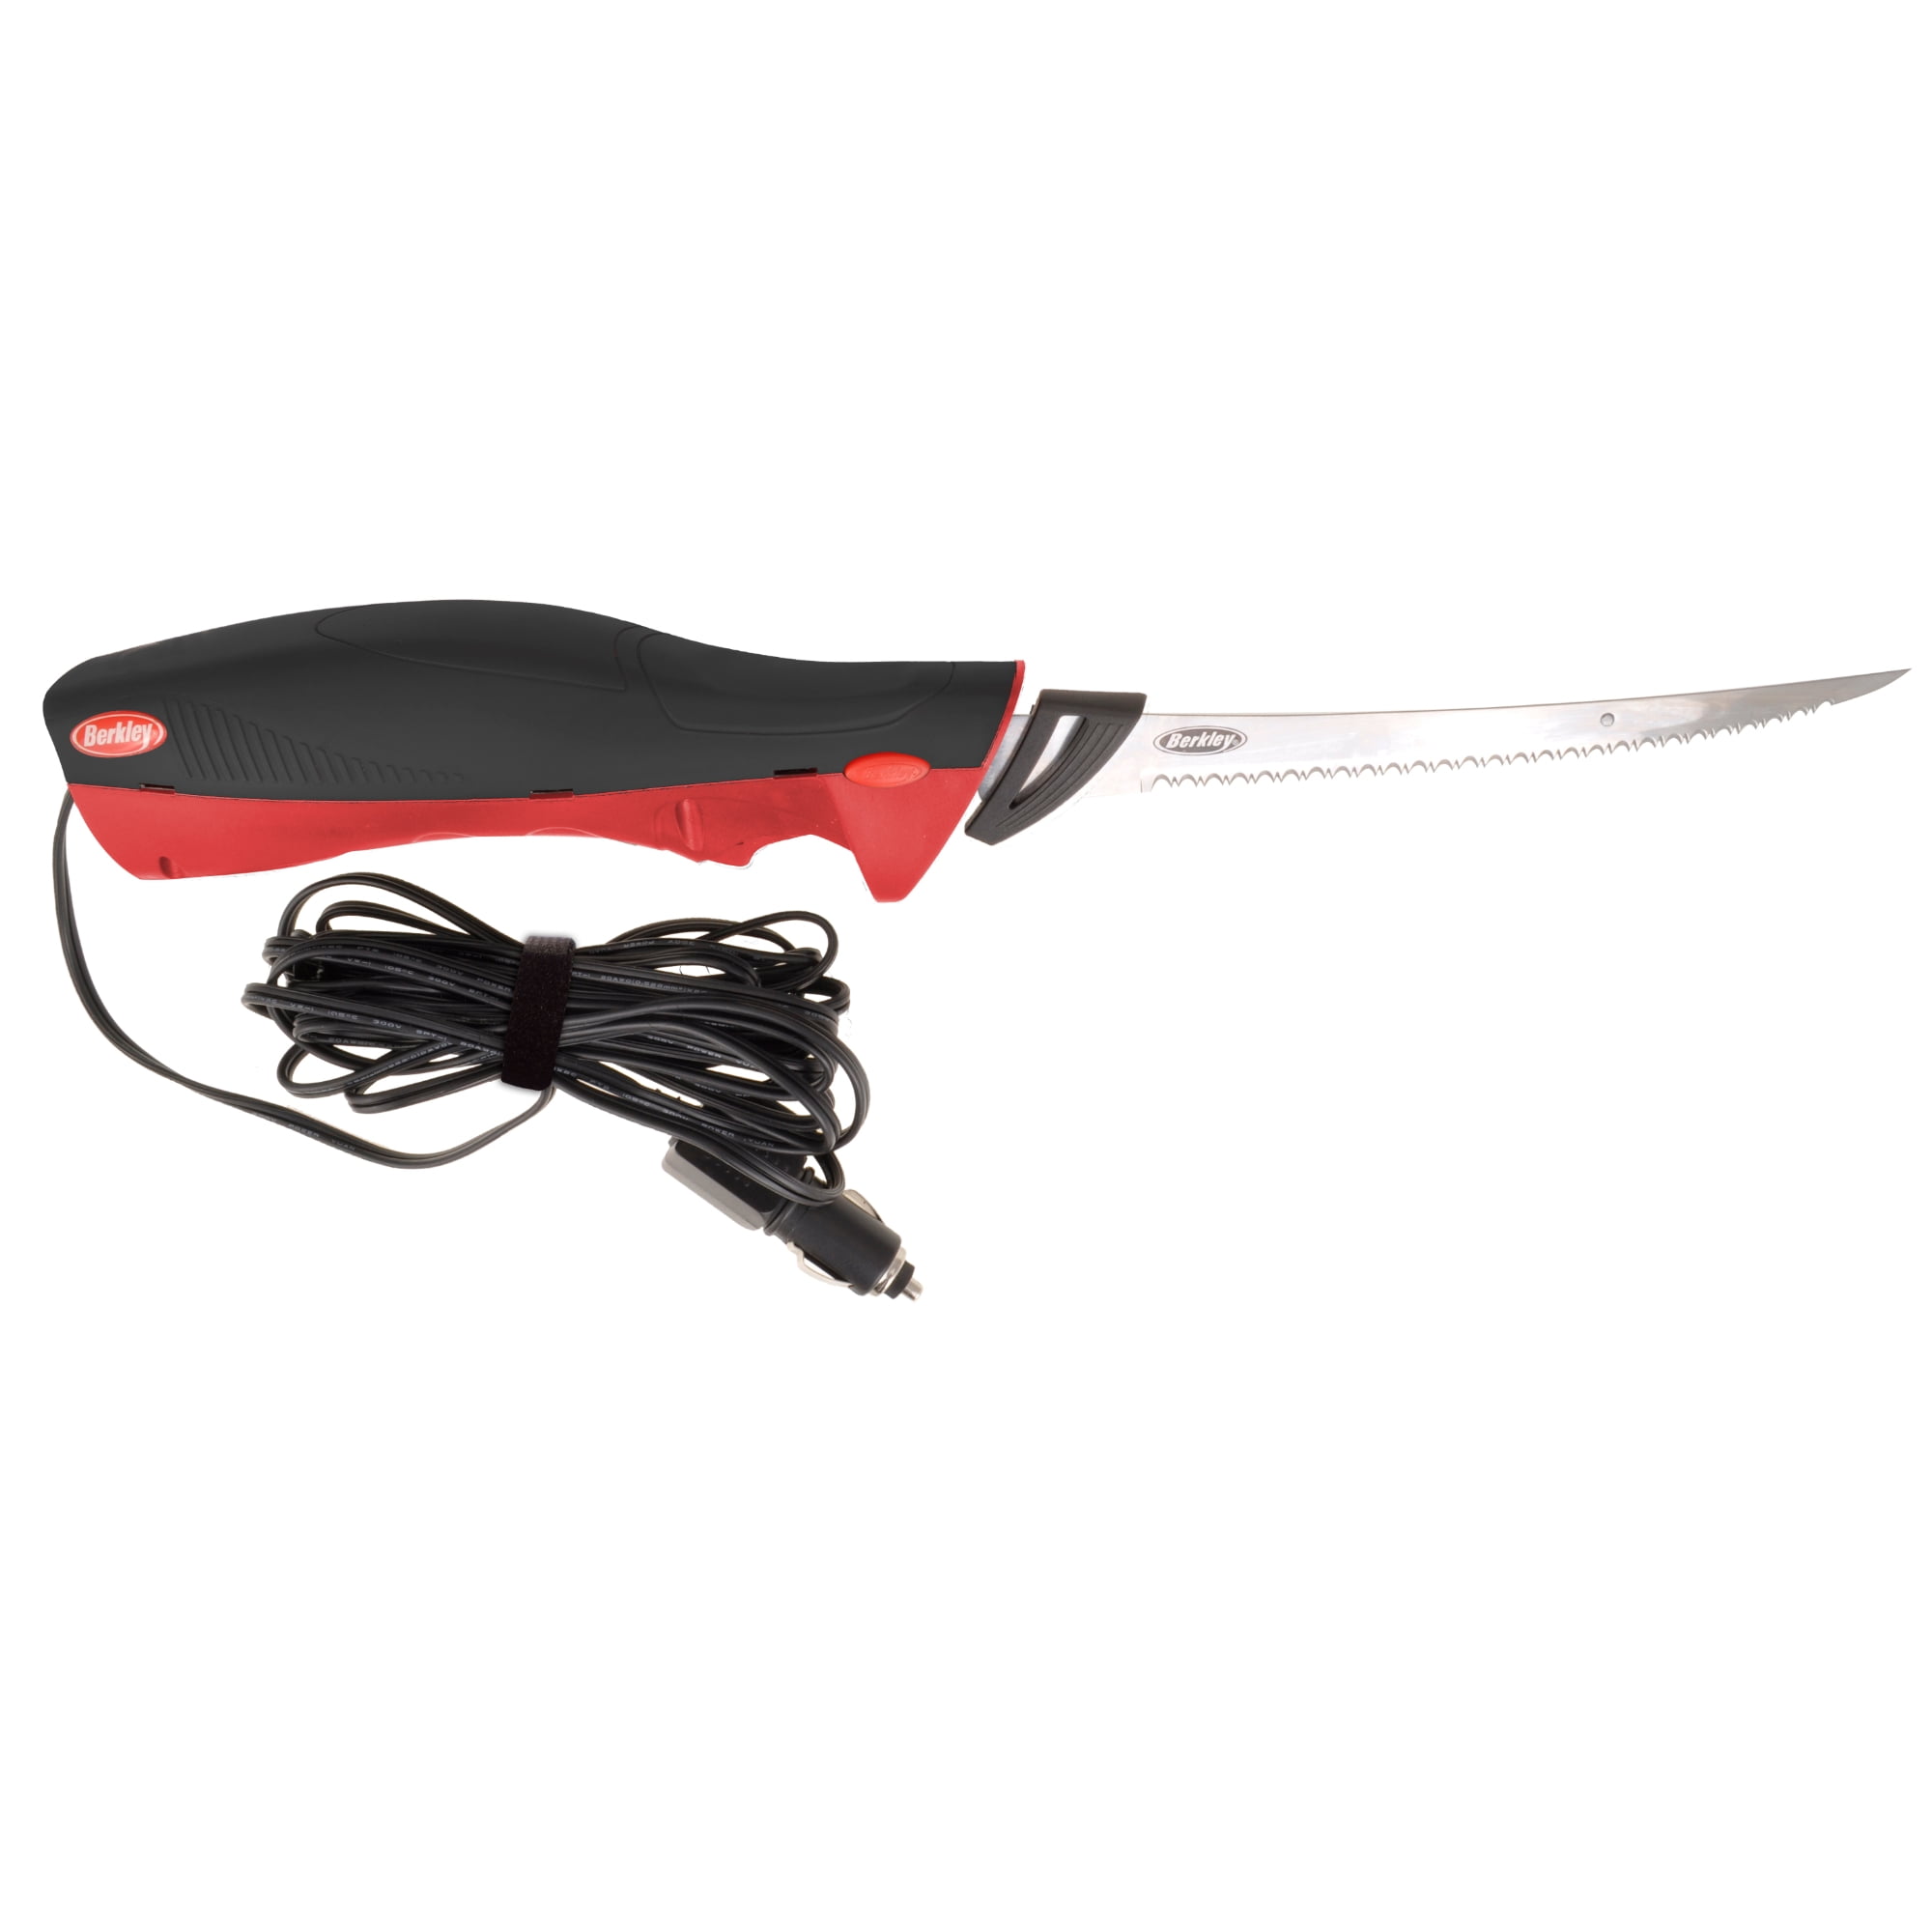 Mershca Cordless Electric Fillet Knife, with 5 Ti-Nitride SS Coated  Non-Stick Reciprocating Blades & Cooling Hole Non-Slip Grip Handle &  Practical